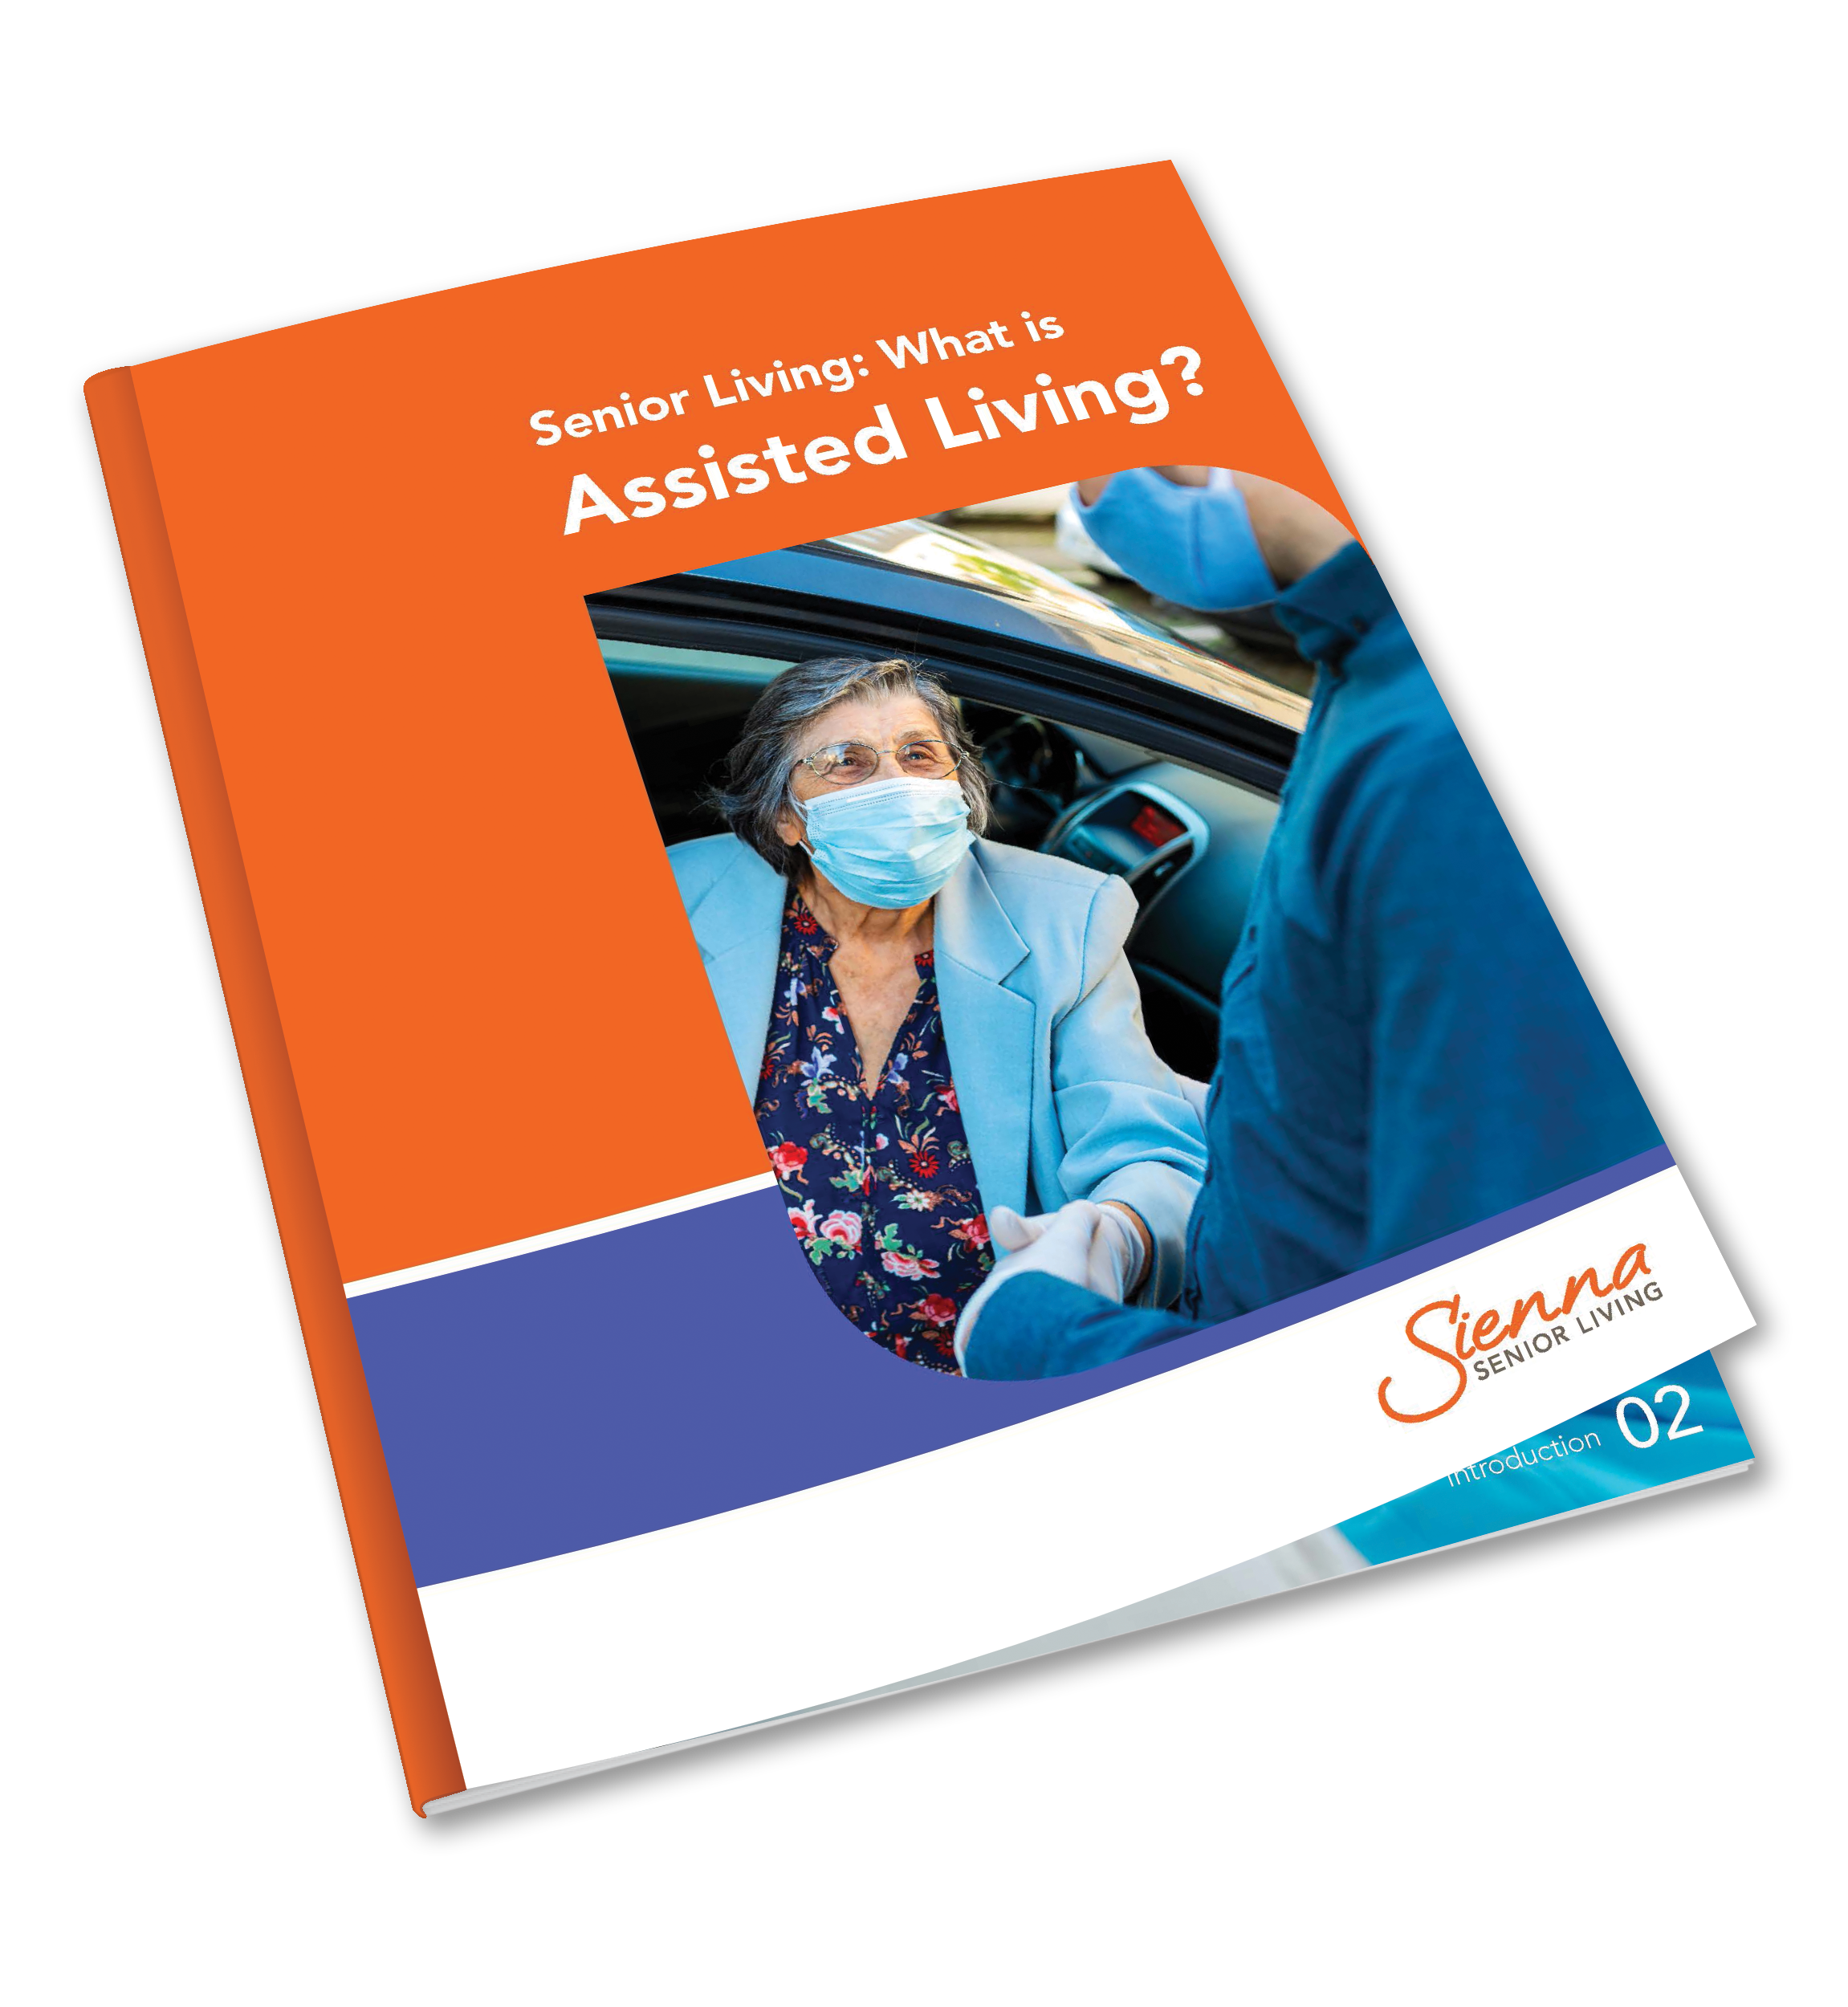 Assisted living guide cover with a senior in mask smiling towards a man in mask who is helping her to get off the car